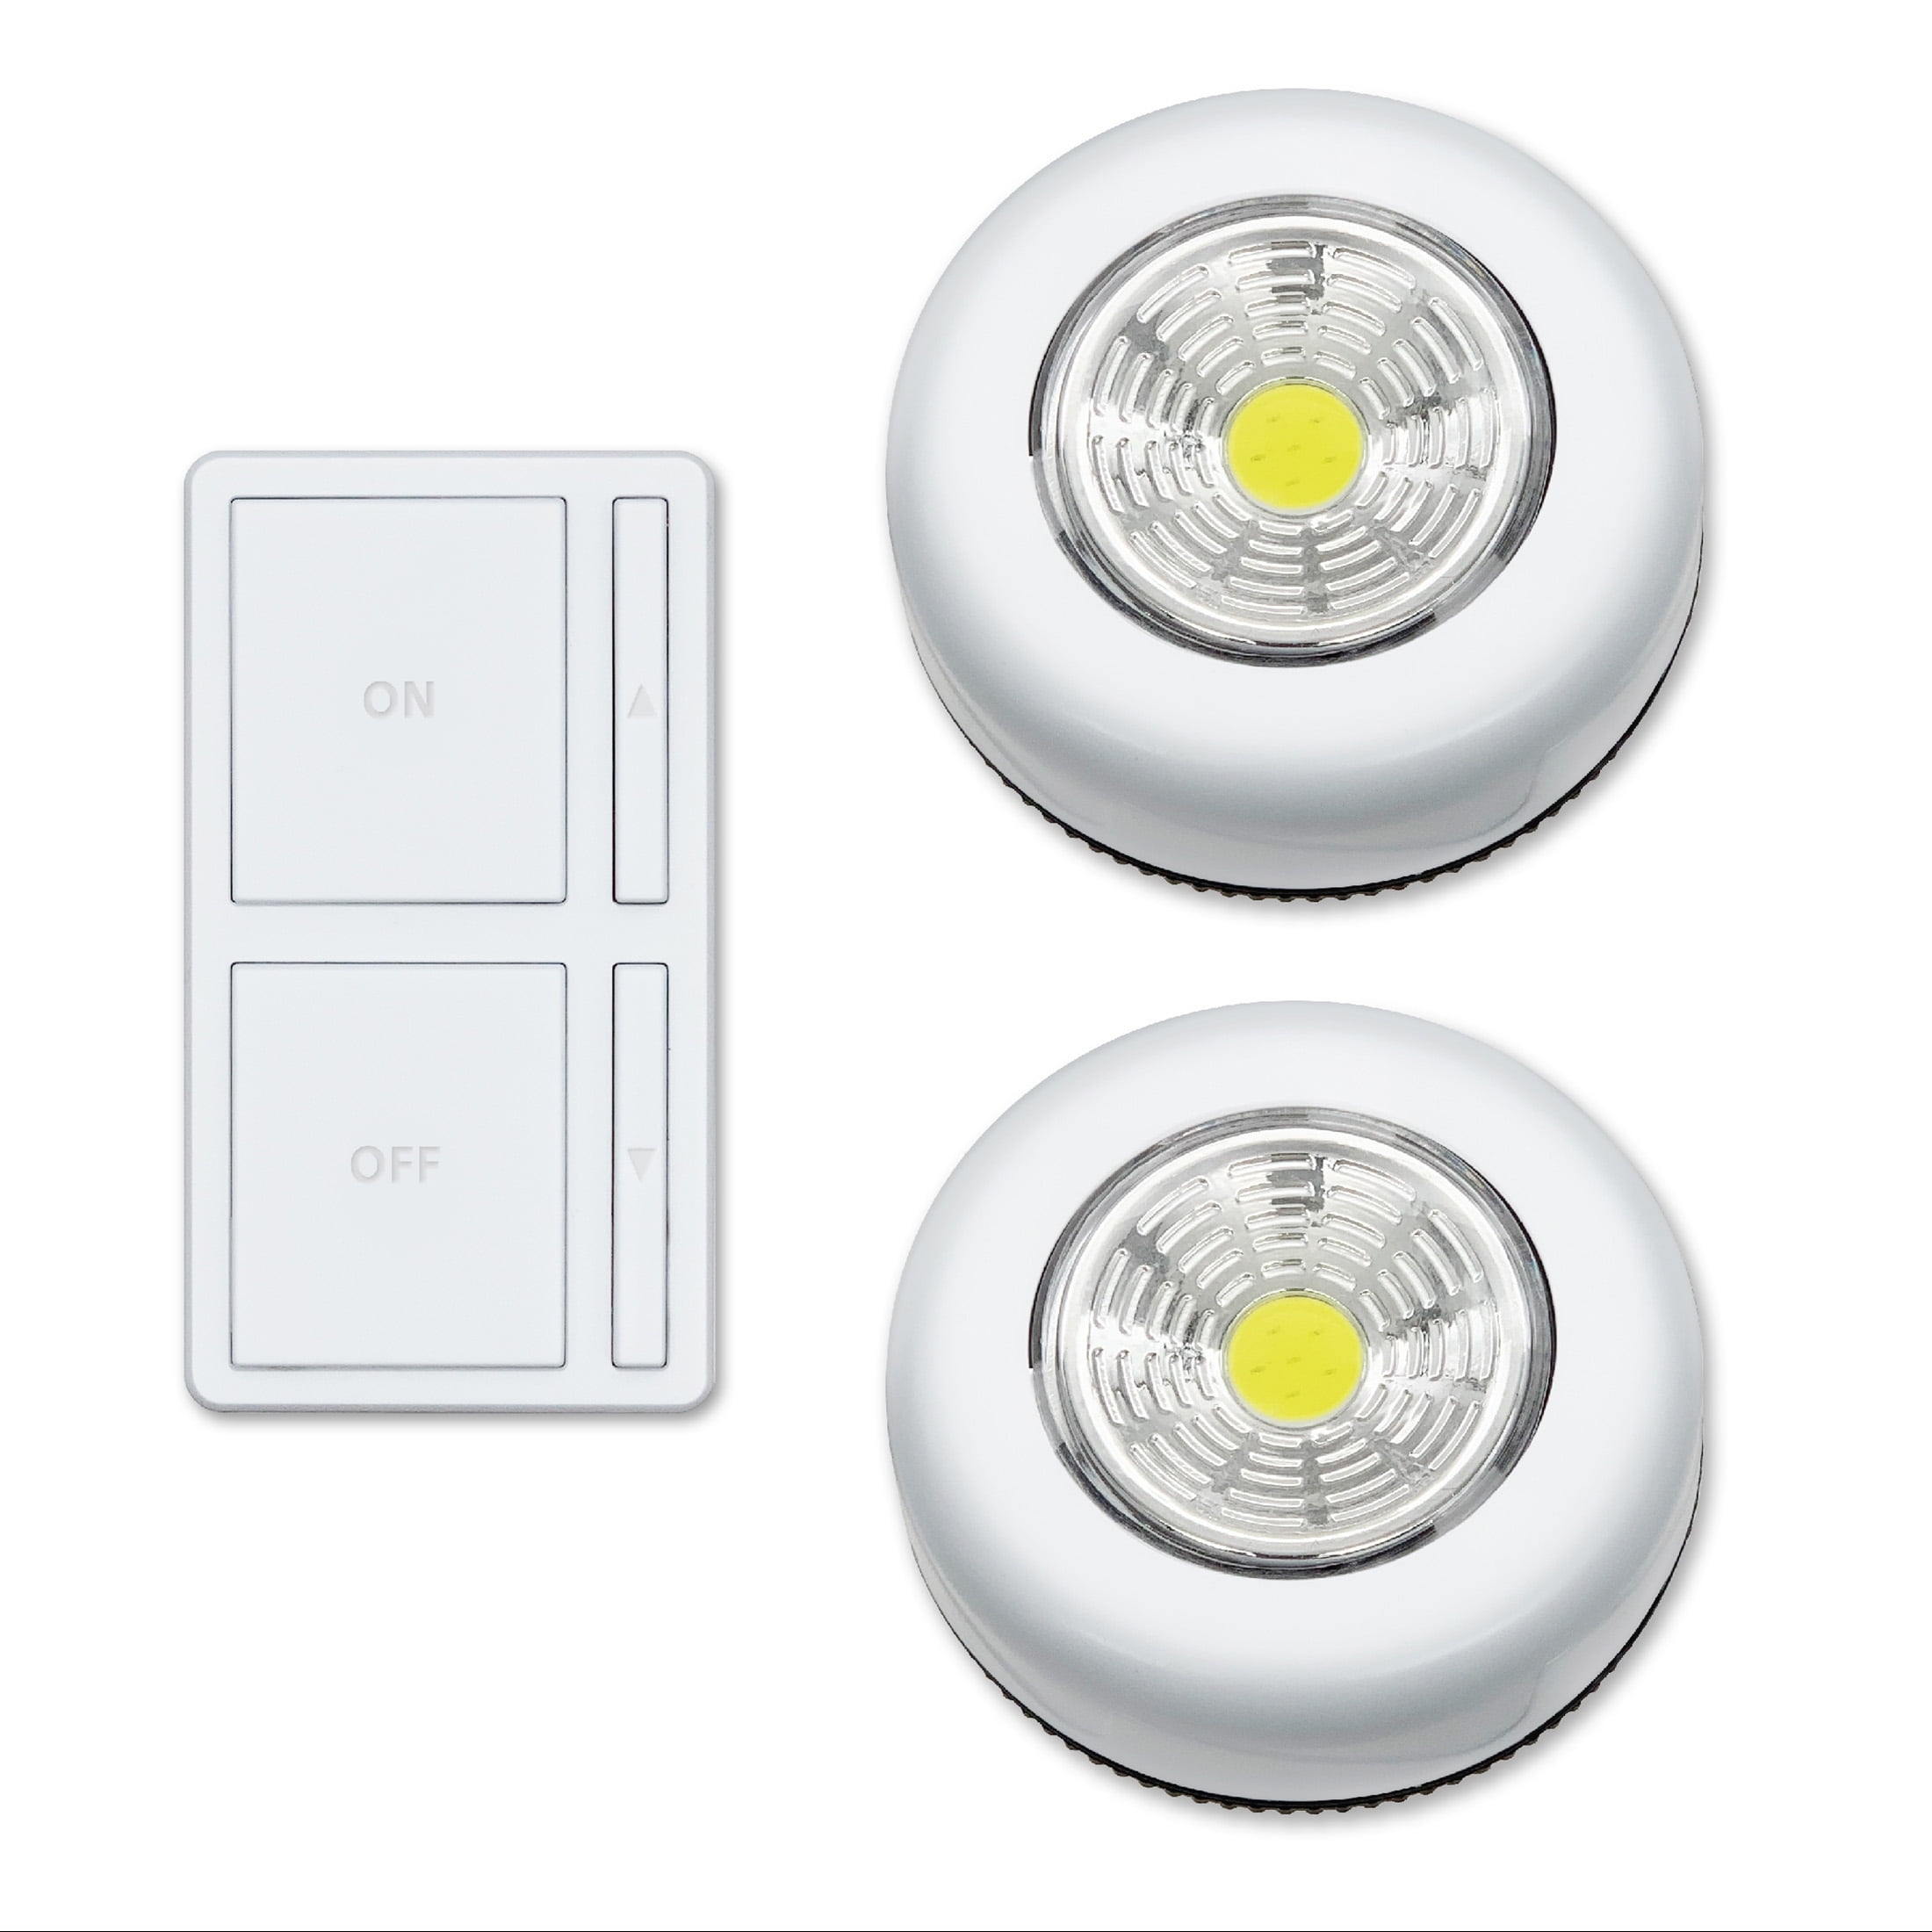 Rendition eskortere Tidsserier Great Value Wireless LED Puck Lights with Wall Switch - 2 Pack - Walmart.com